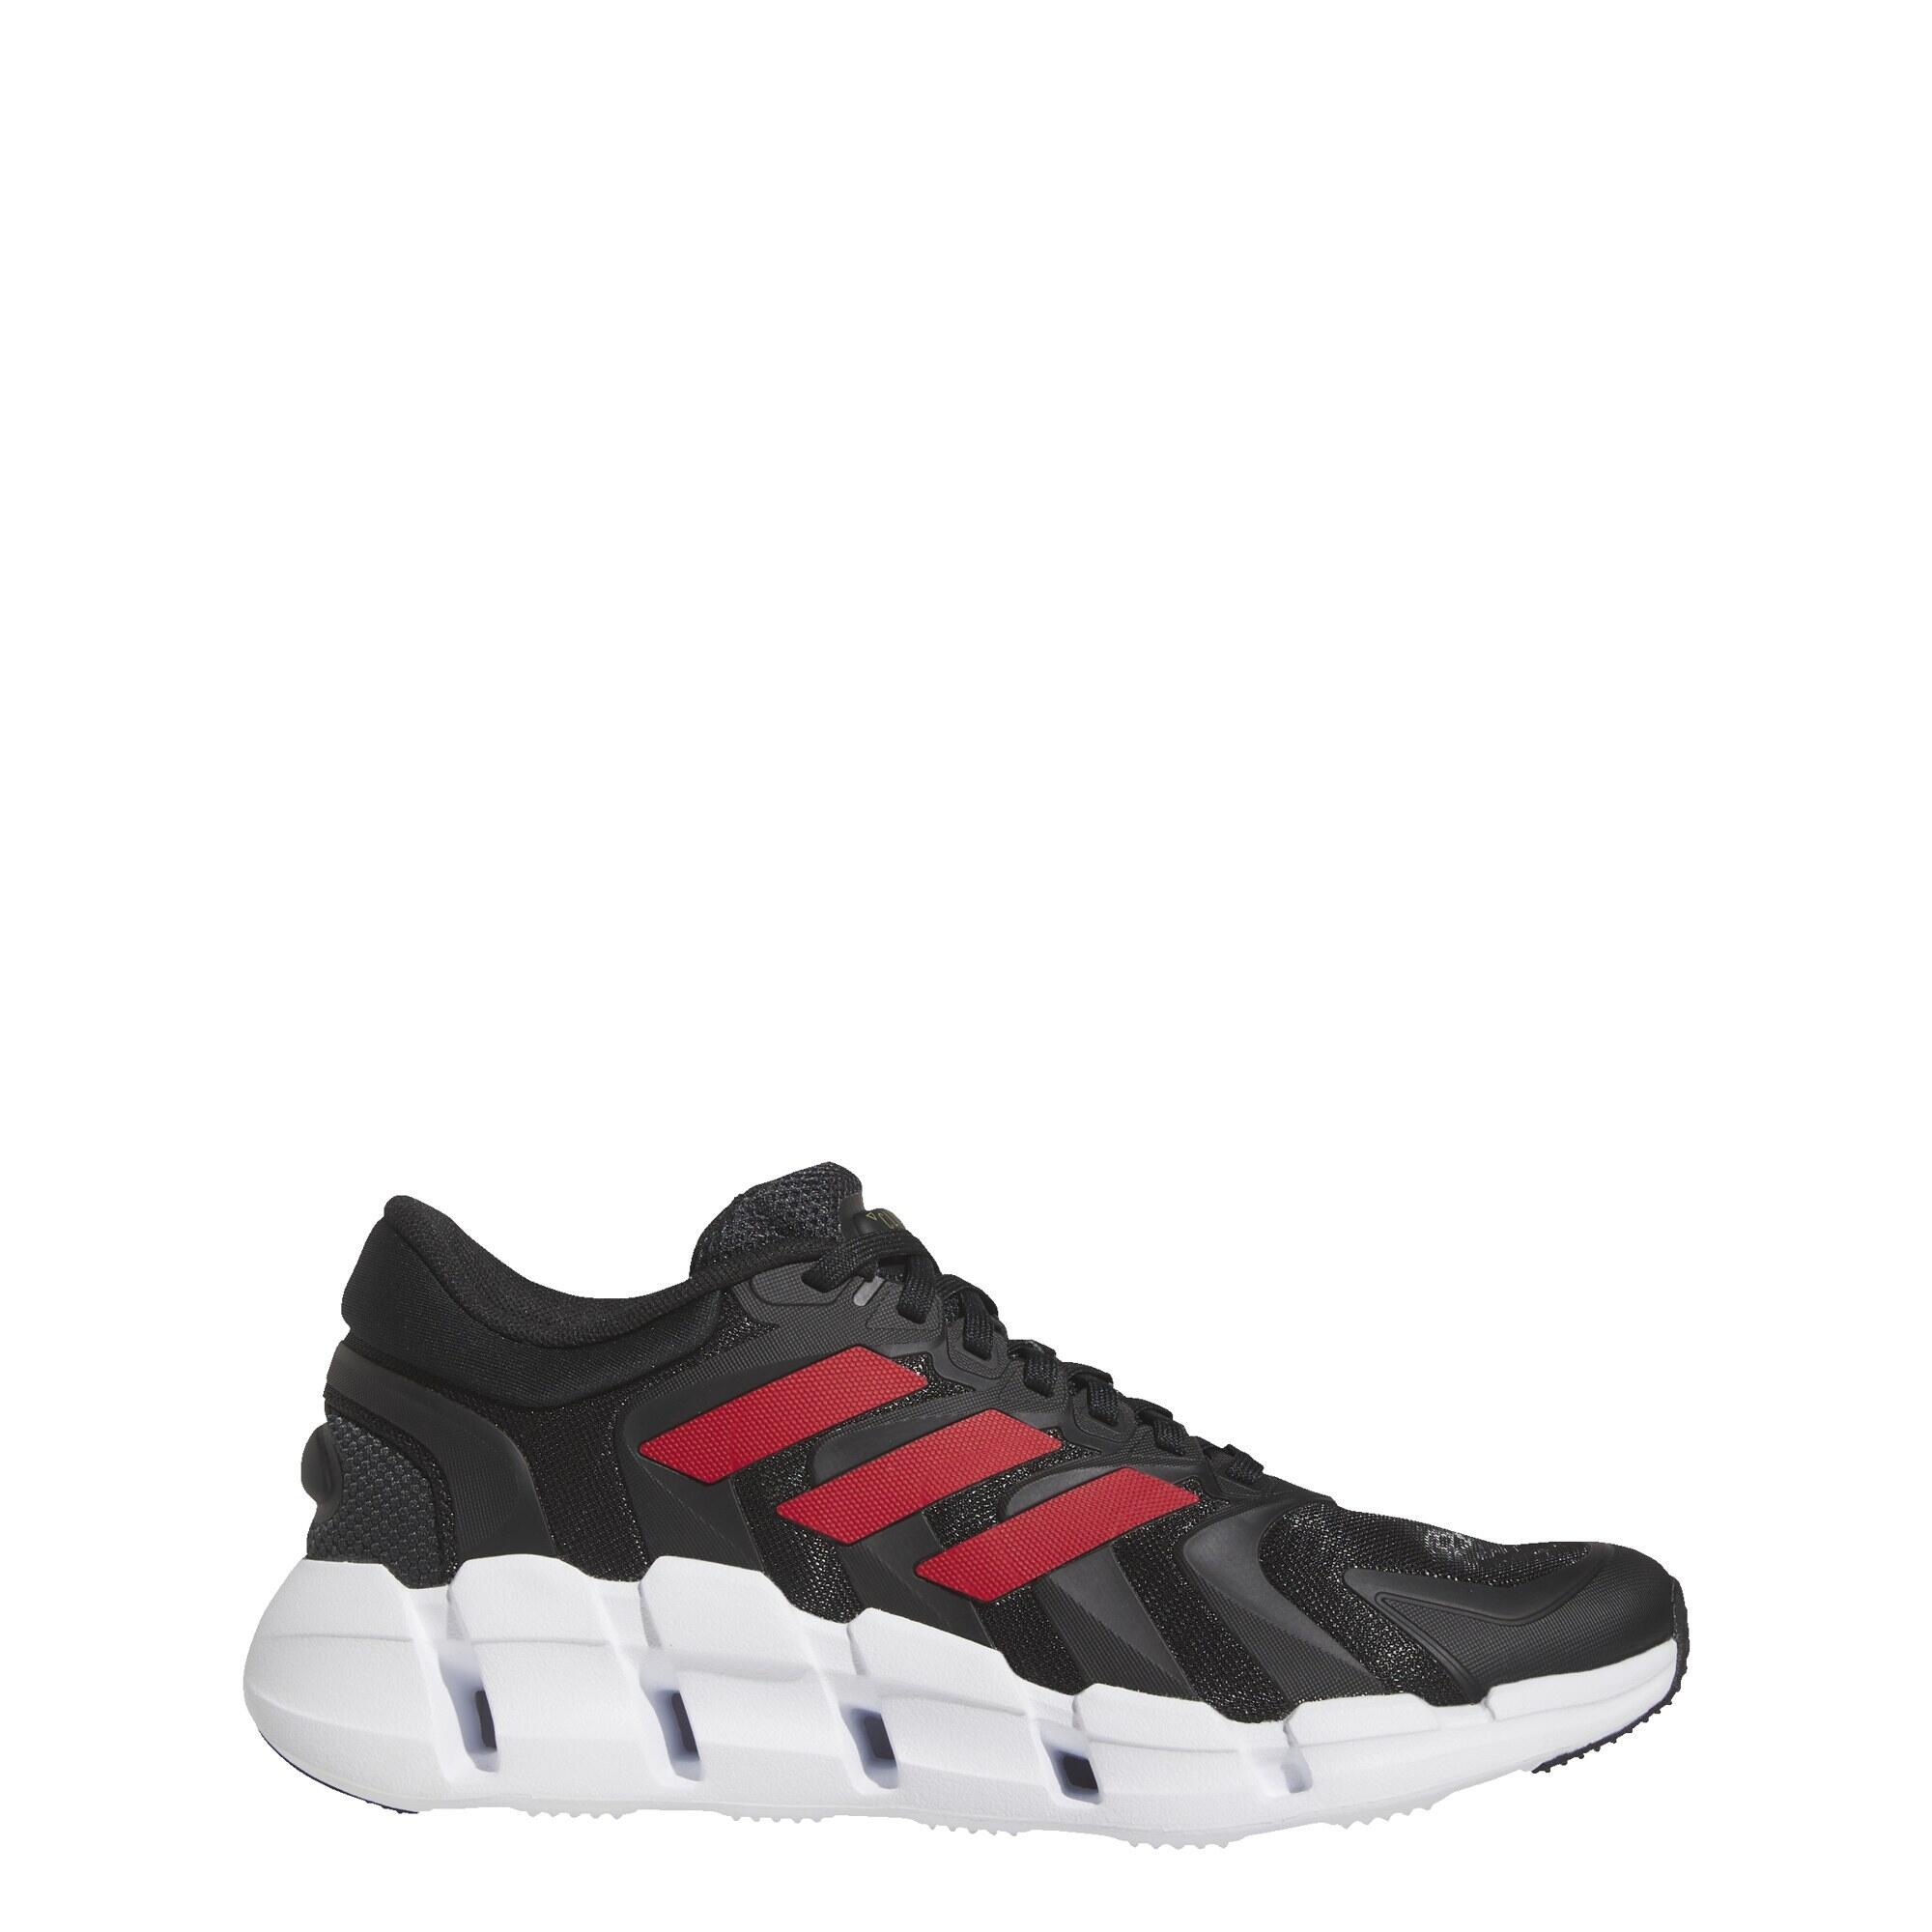 ADIDAS Climacool Ventice Shoes